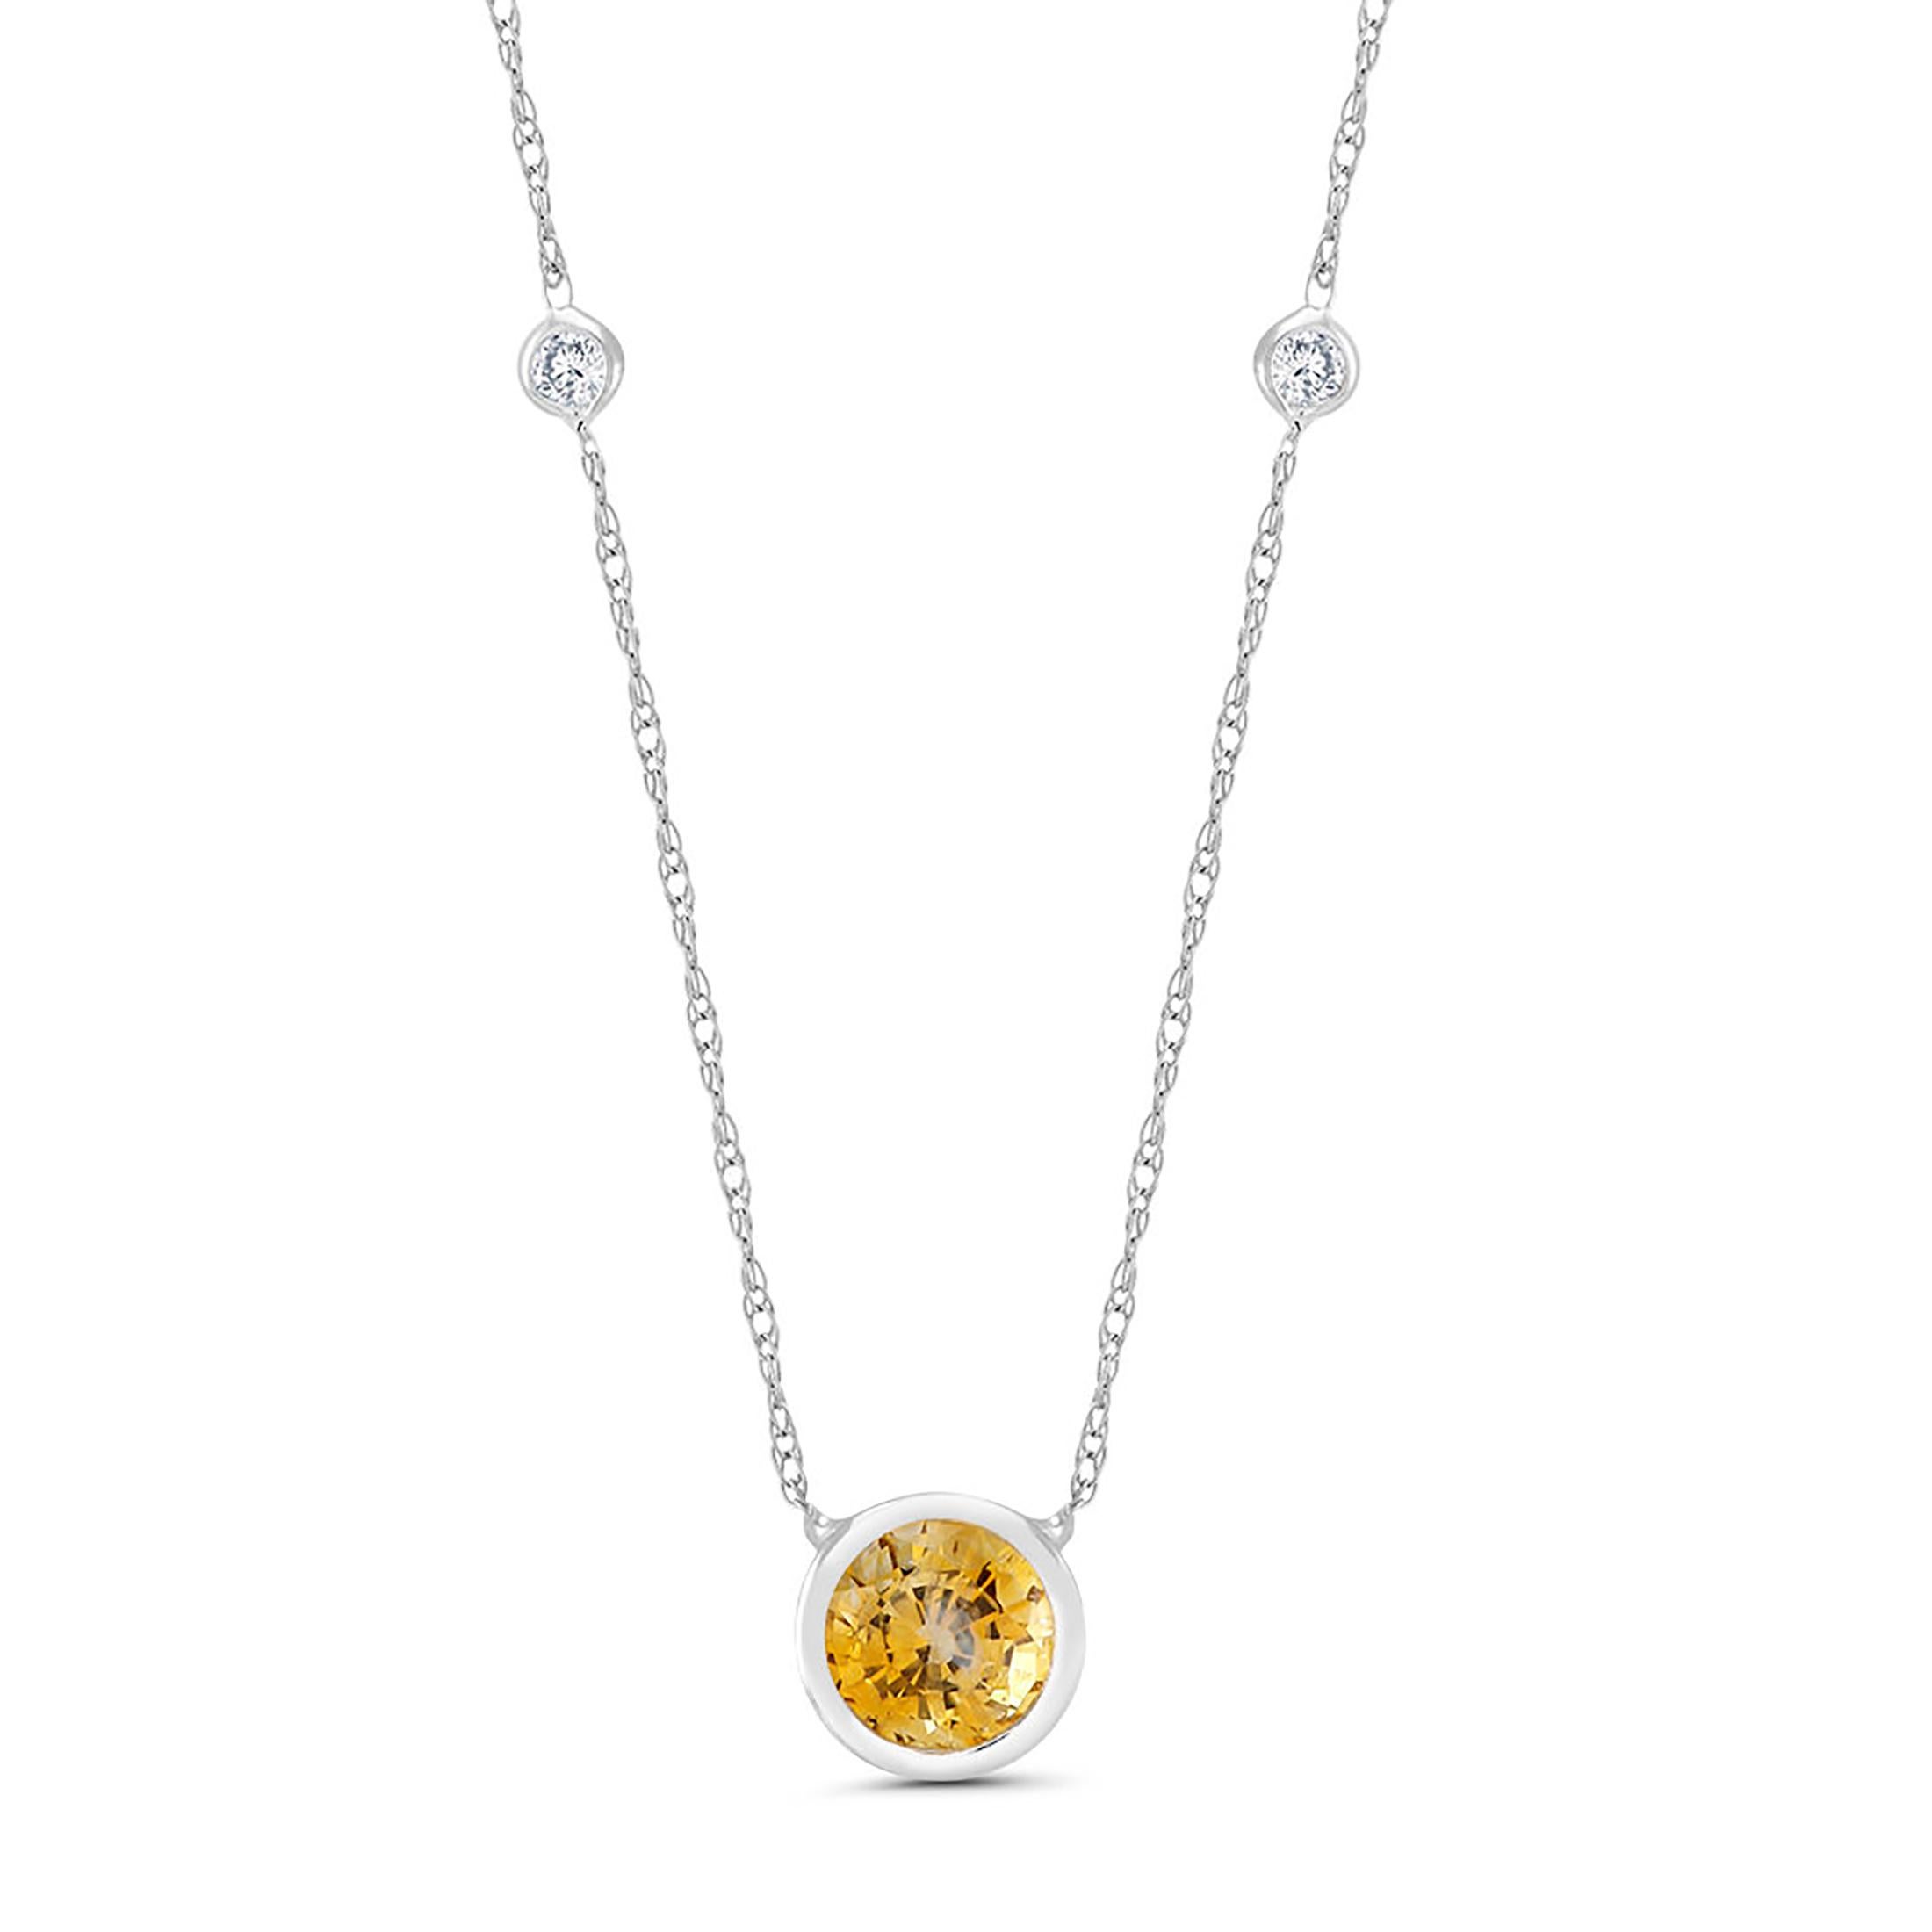 can i wear yellow and white gold necklace together